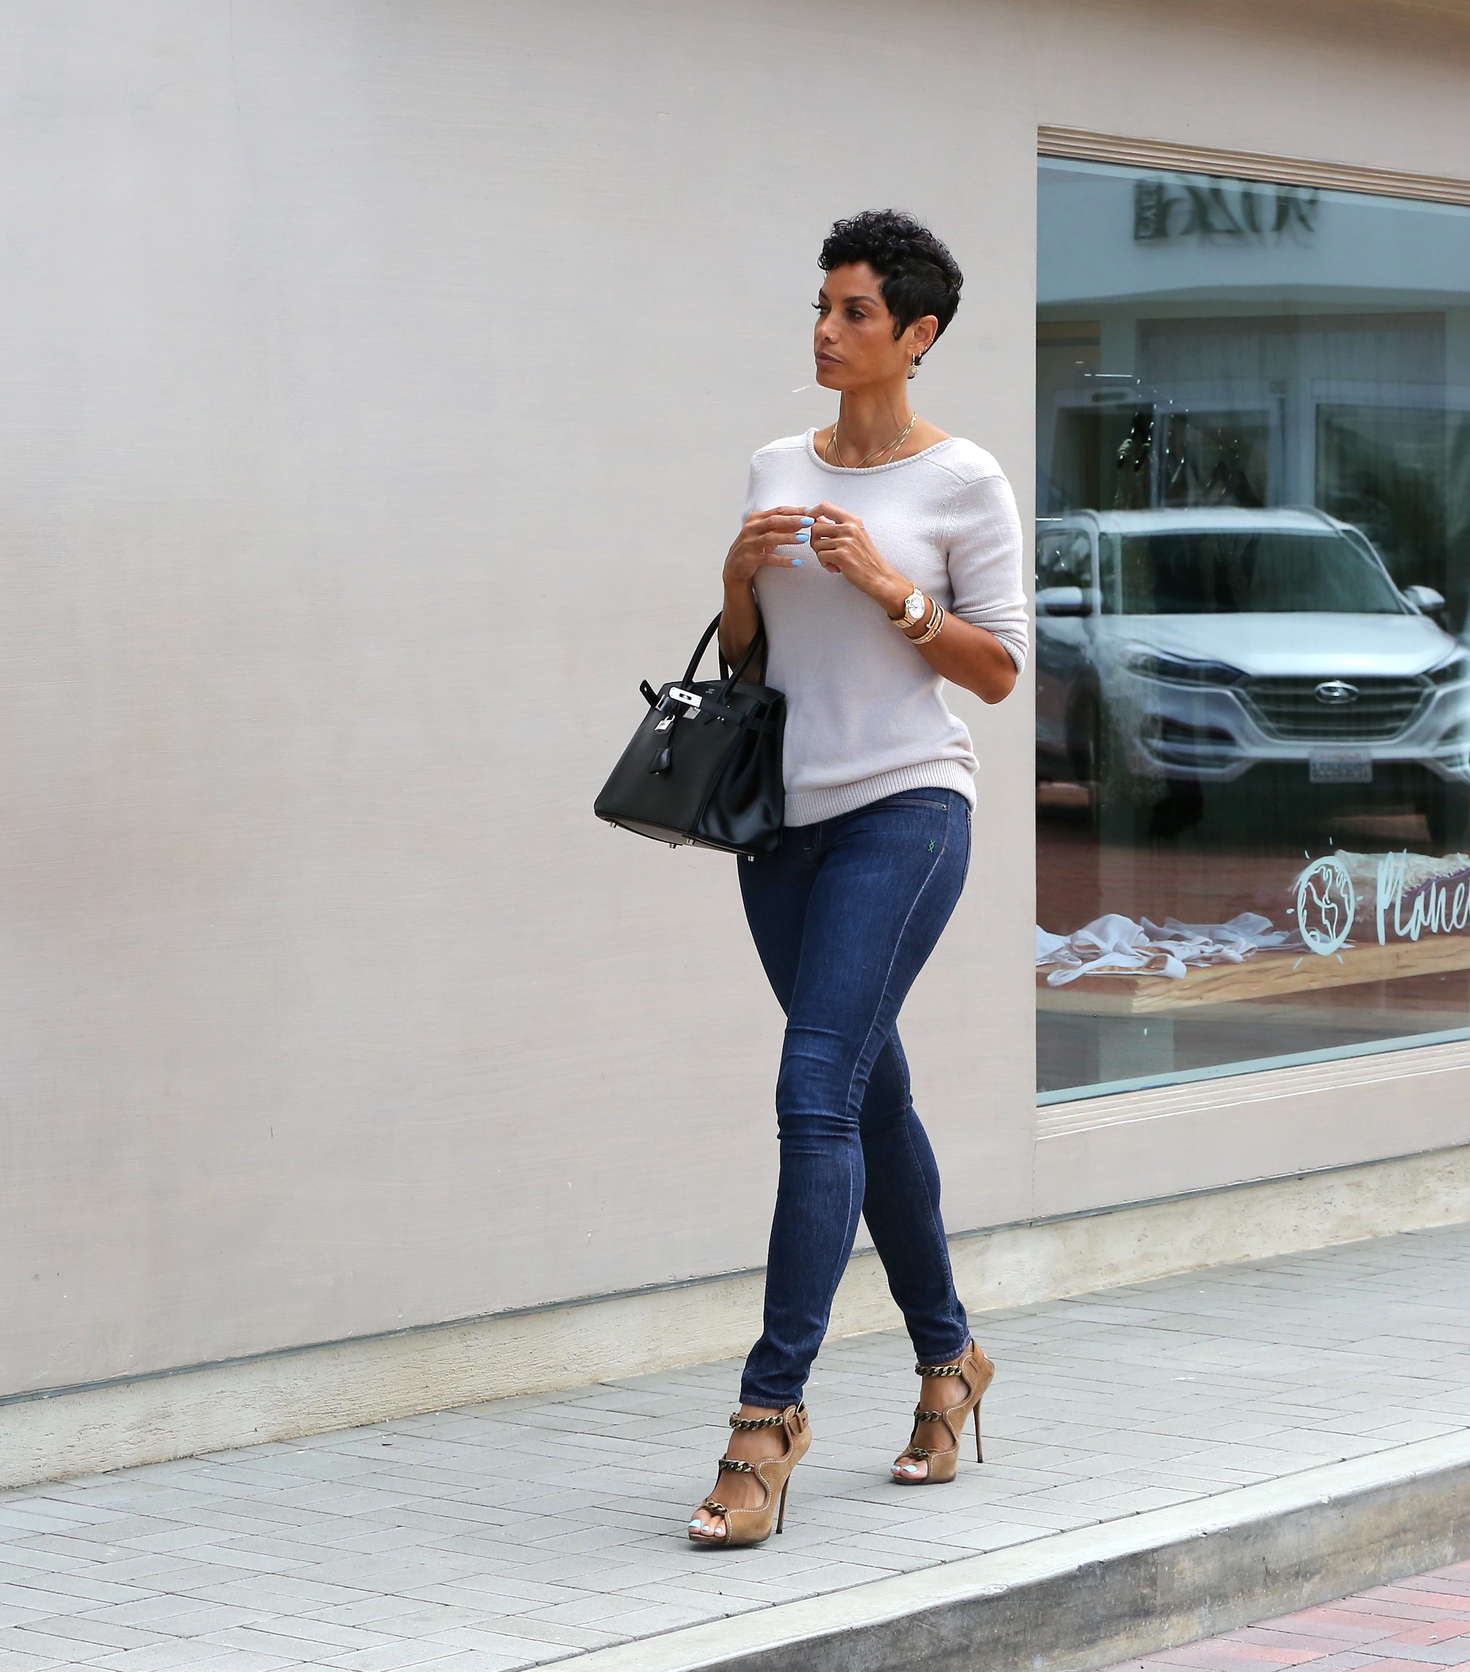 Nicole in Tight Jeans Shopping -02 | GotCeleb